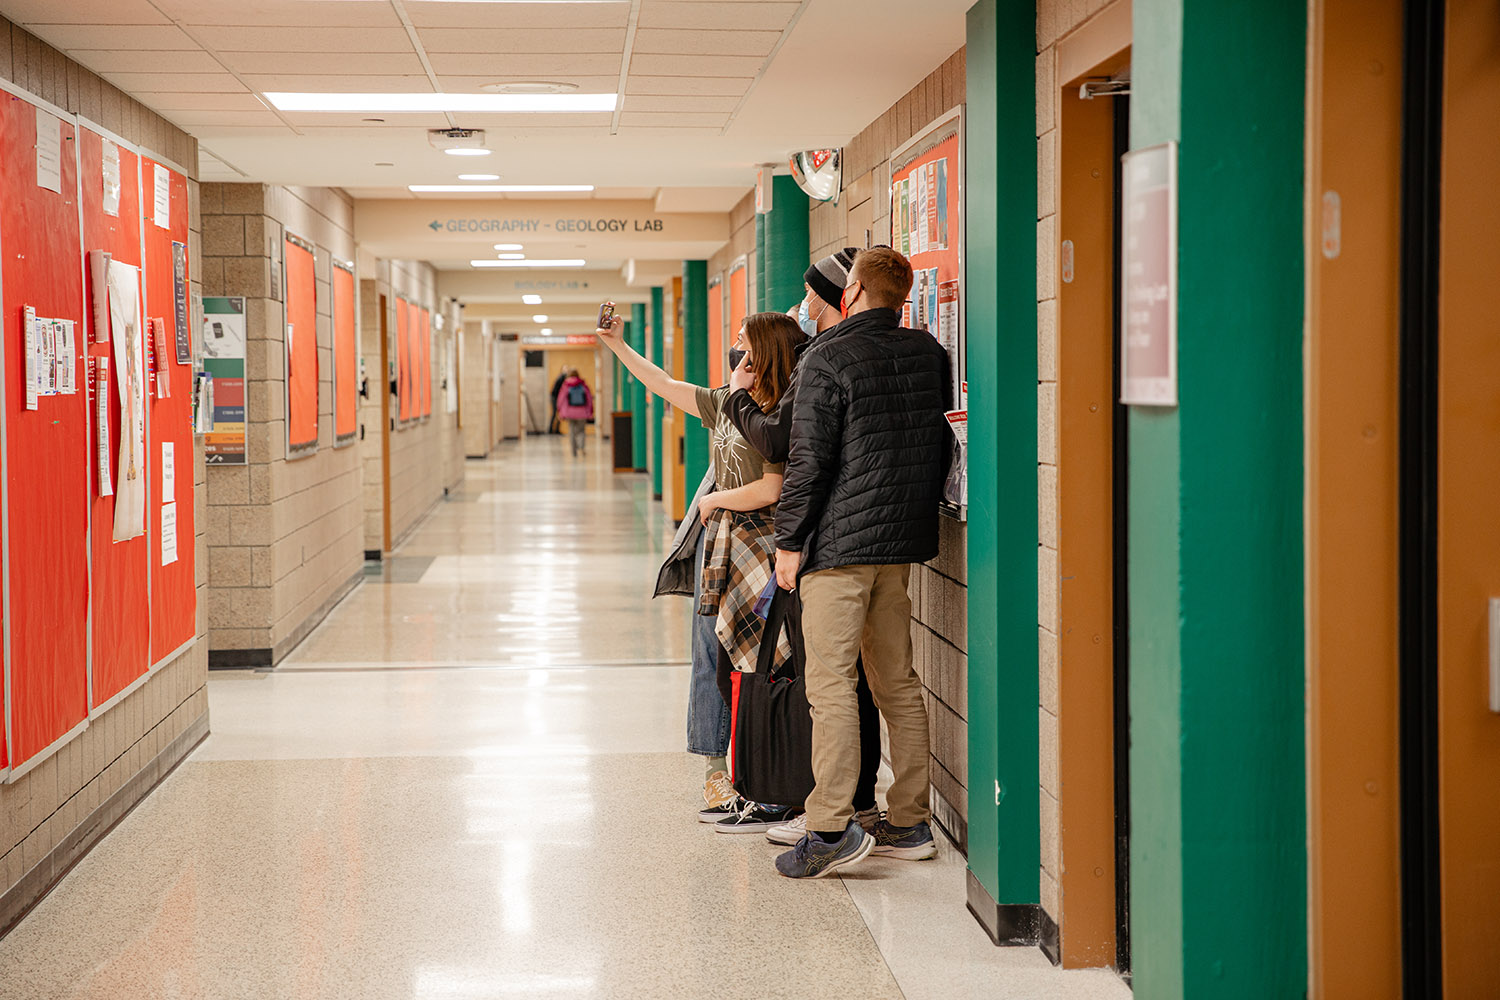 Students in the hallway.